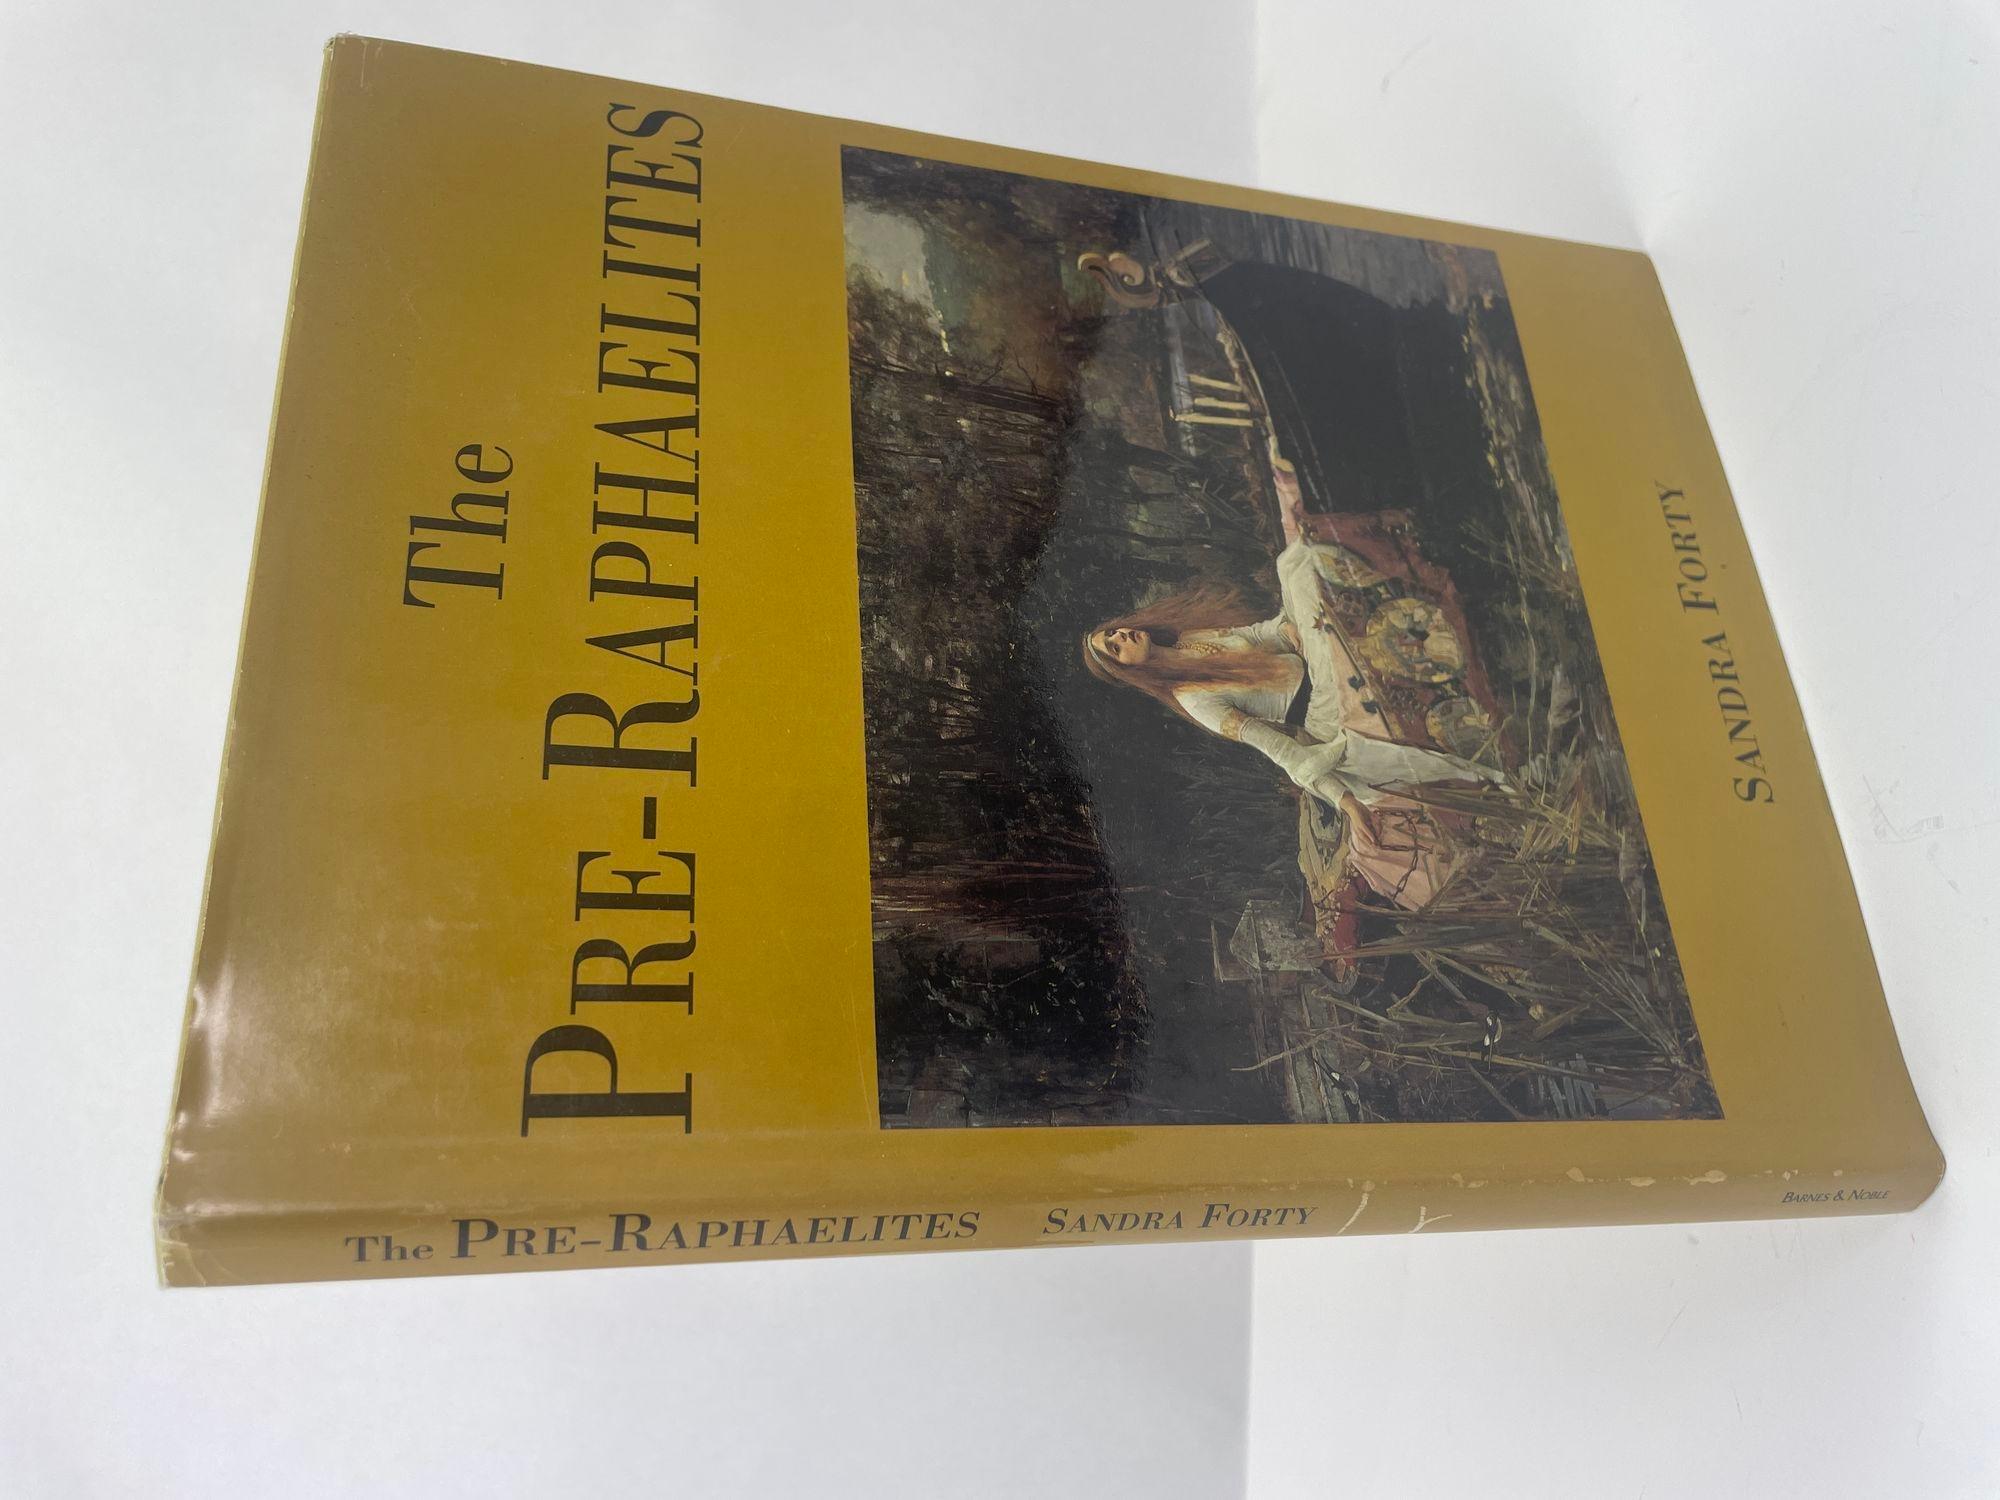 Italian The Pre-Raphaelites by Sandra Forty Hardcover Book 1st Ed. 1997 For Sale